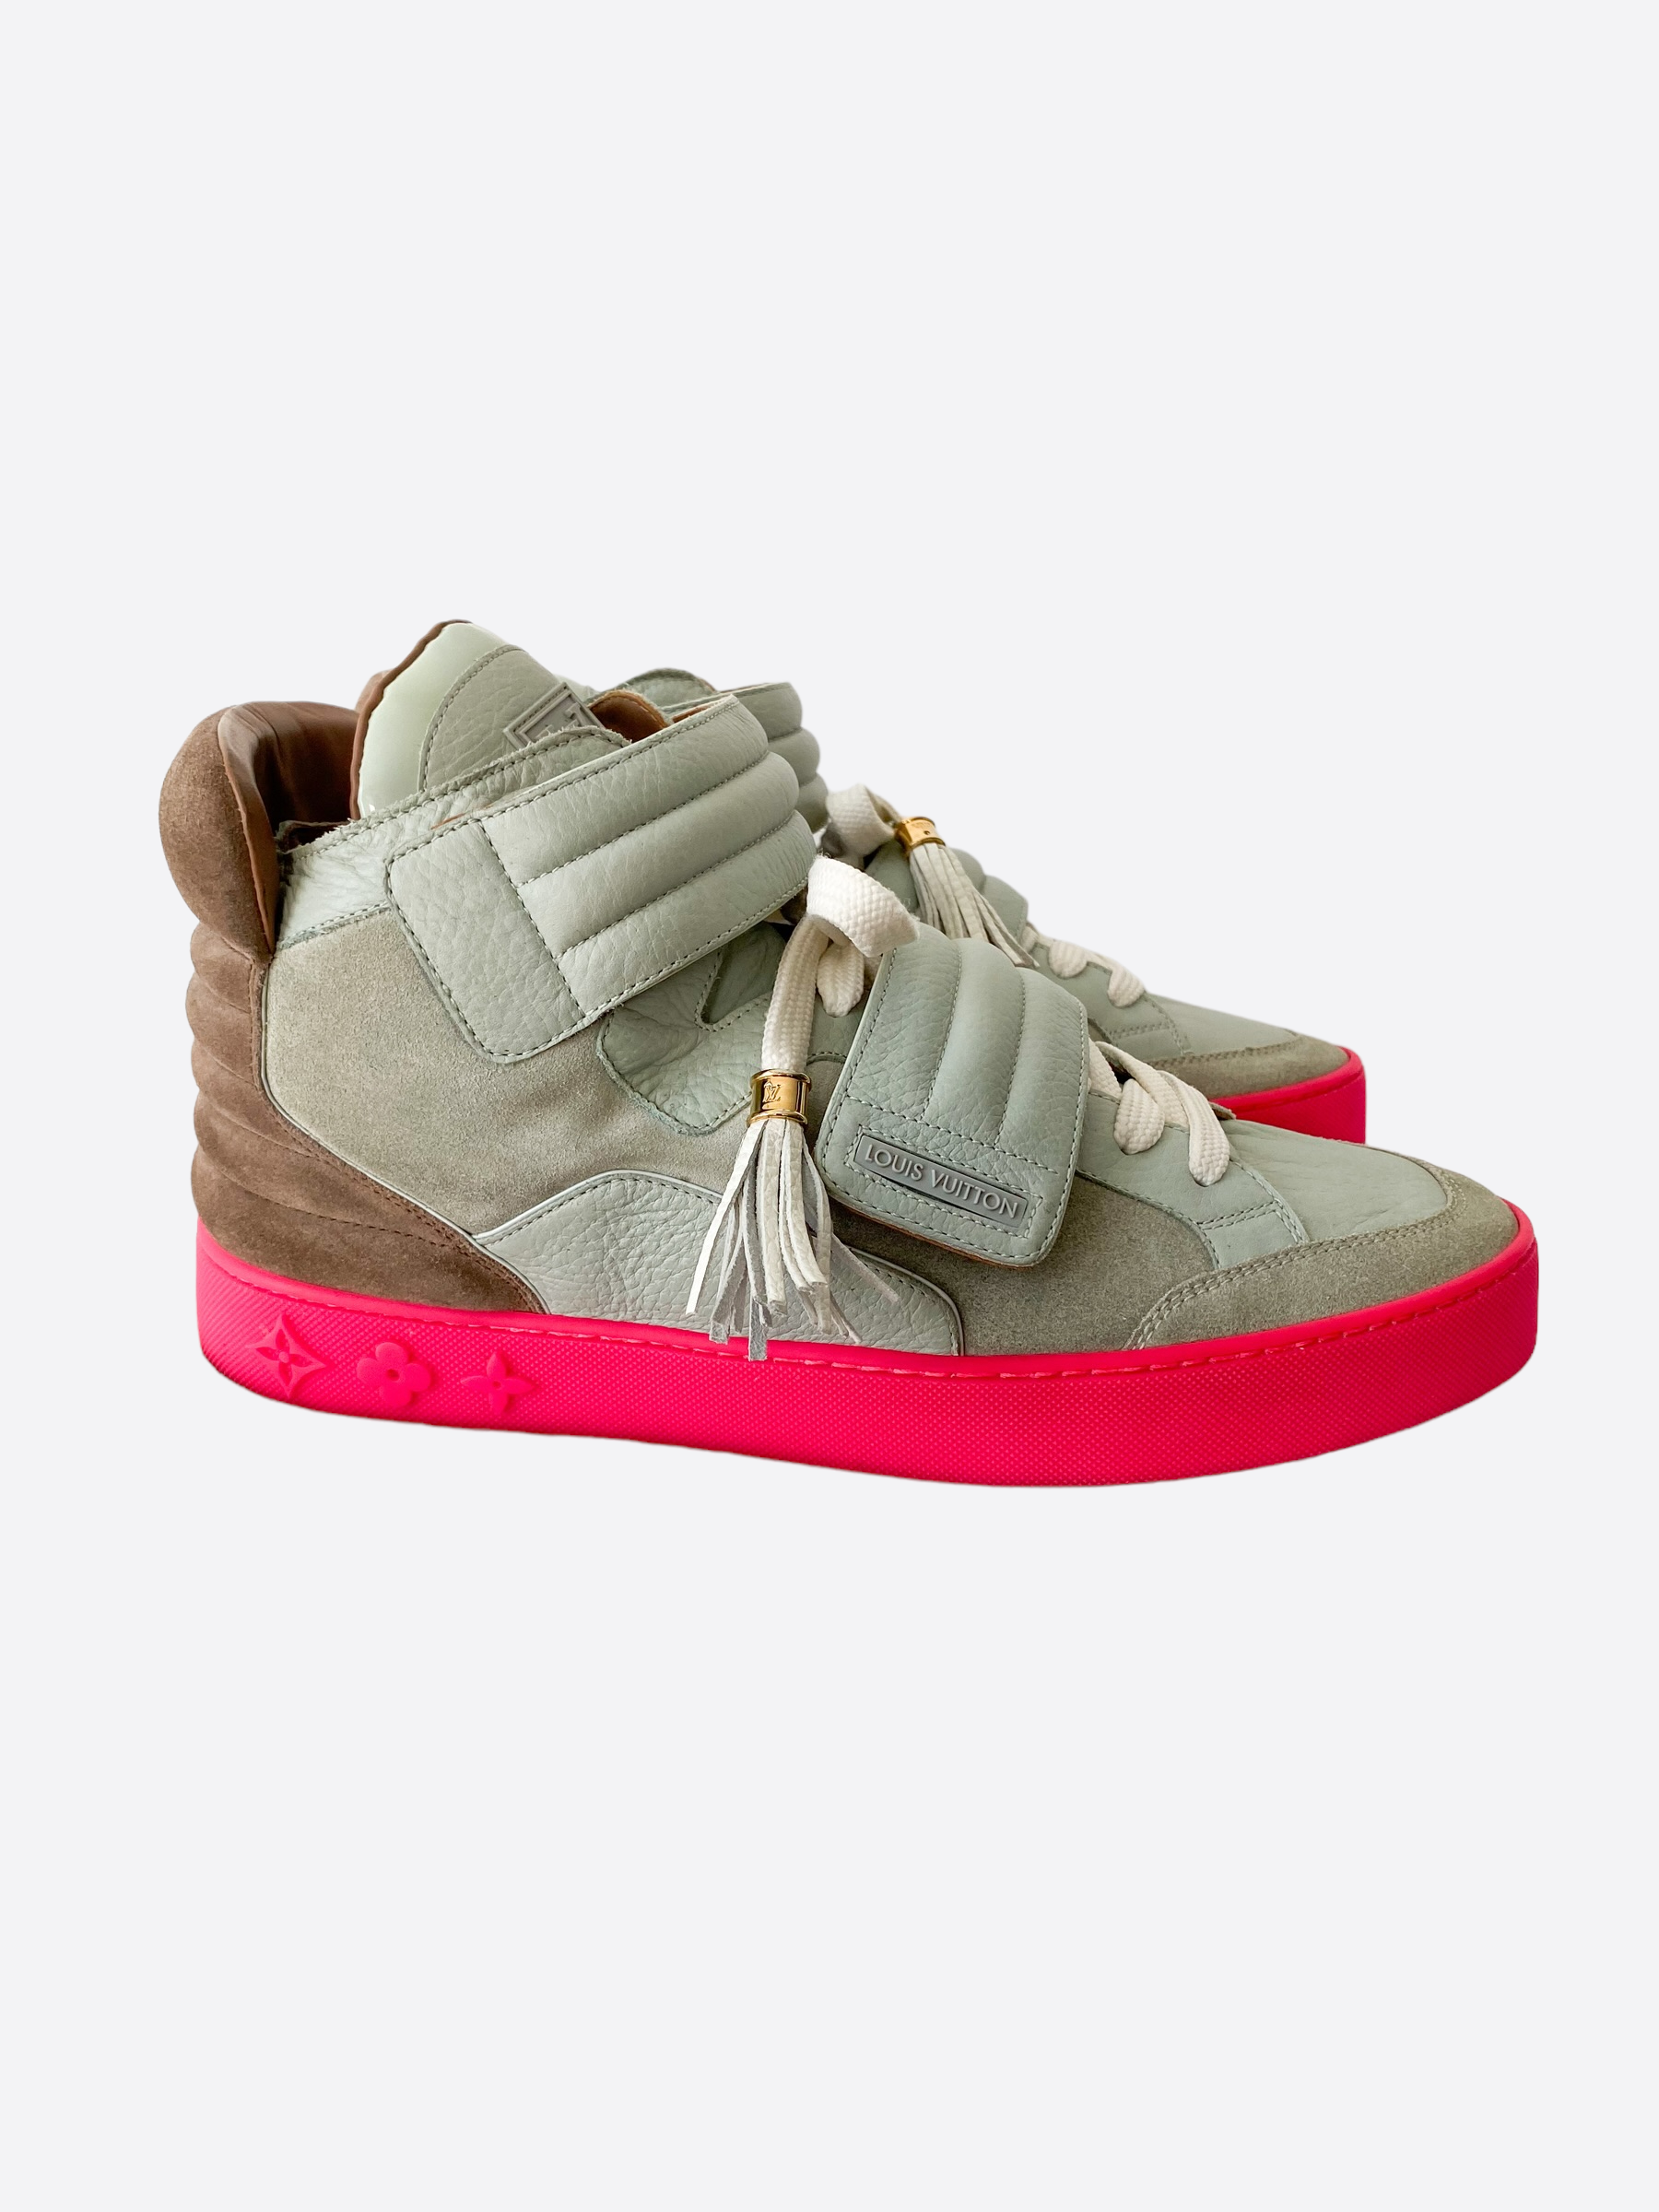 Louis Vuitton Jaspers Kanye Patchwork Grey/Pink - Mens, Size 13